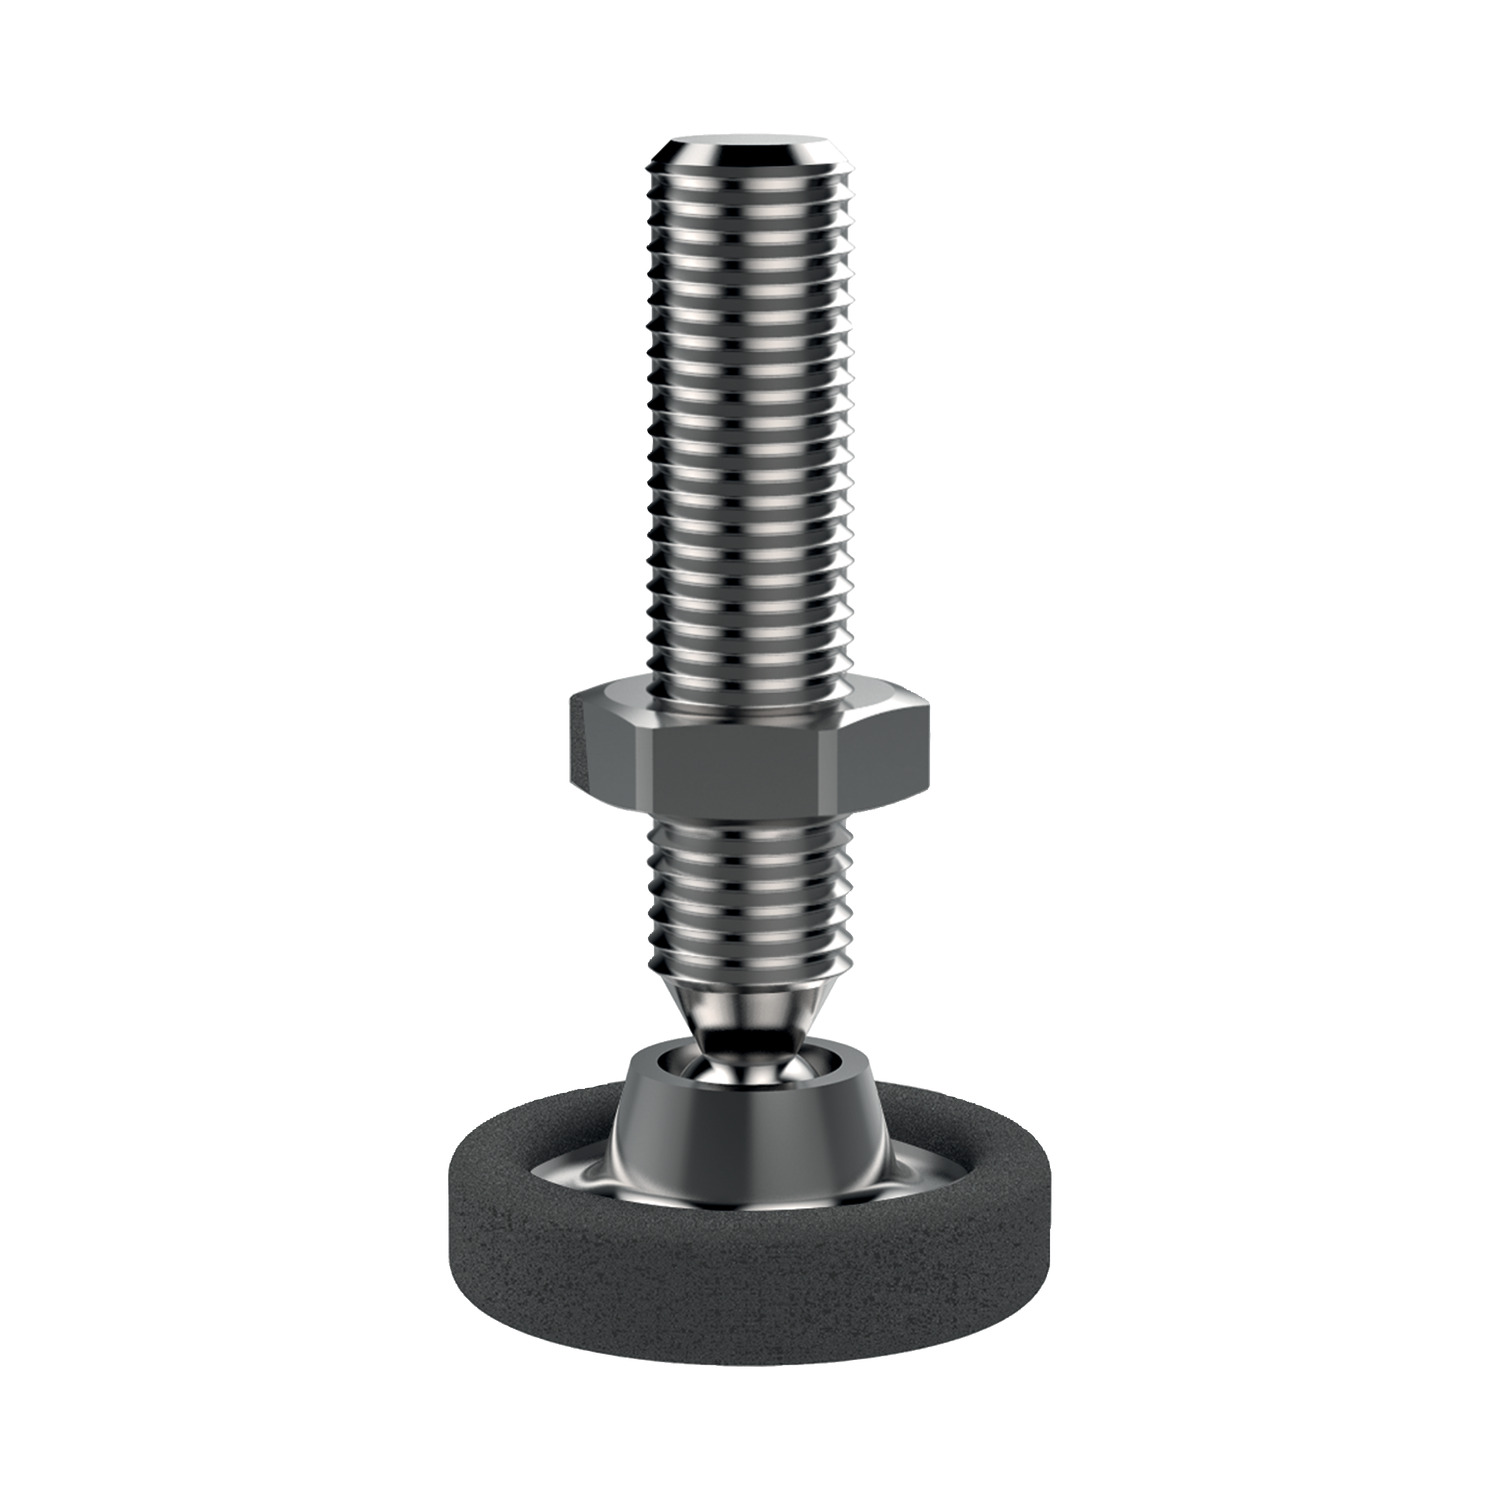 Product 45084, Clamping Screws for auto adjust toggle clamps / 